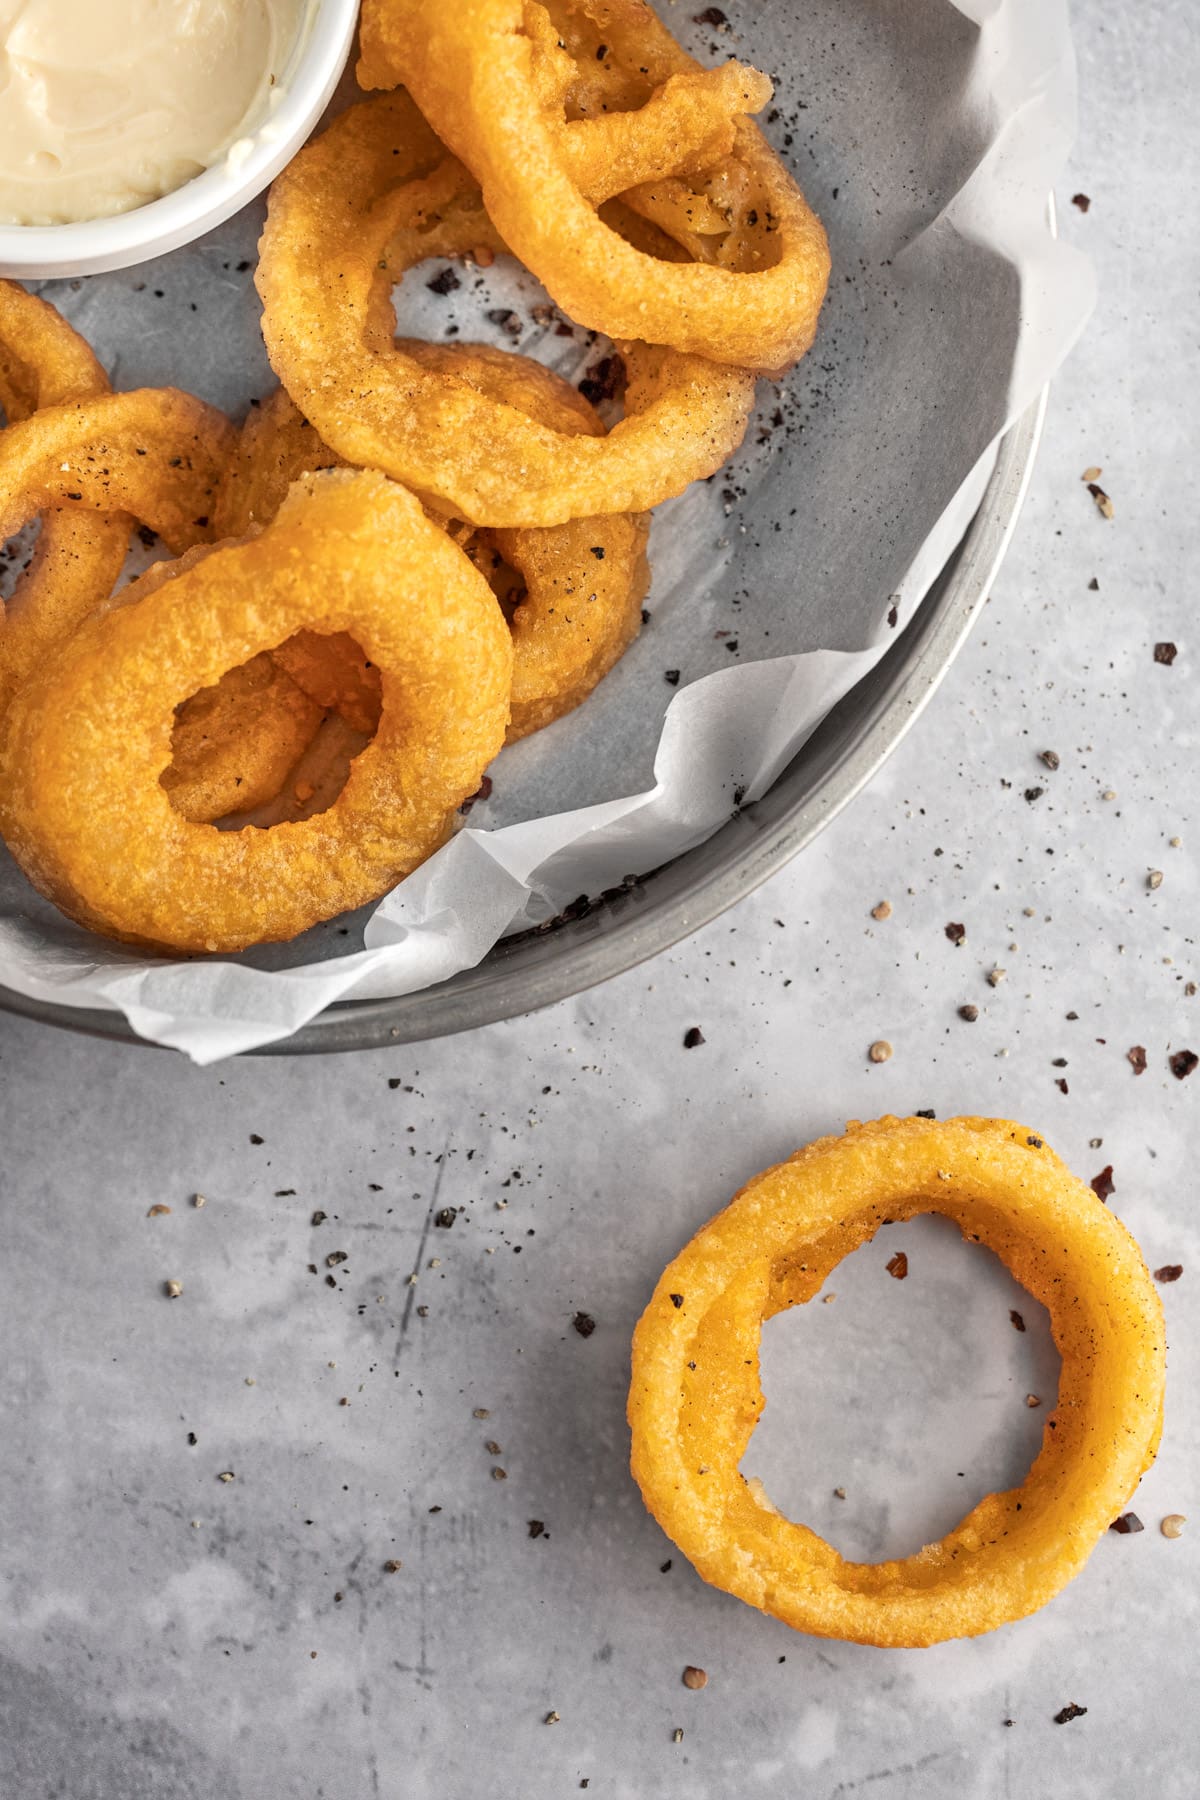 Onion rings in a round metal tray on a grey marble table with one onion ring on the table.